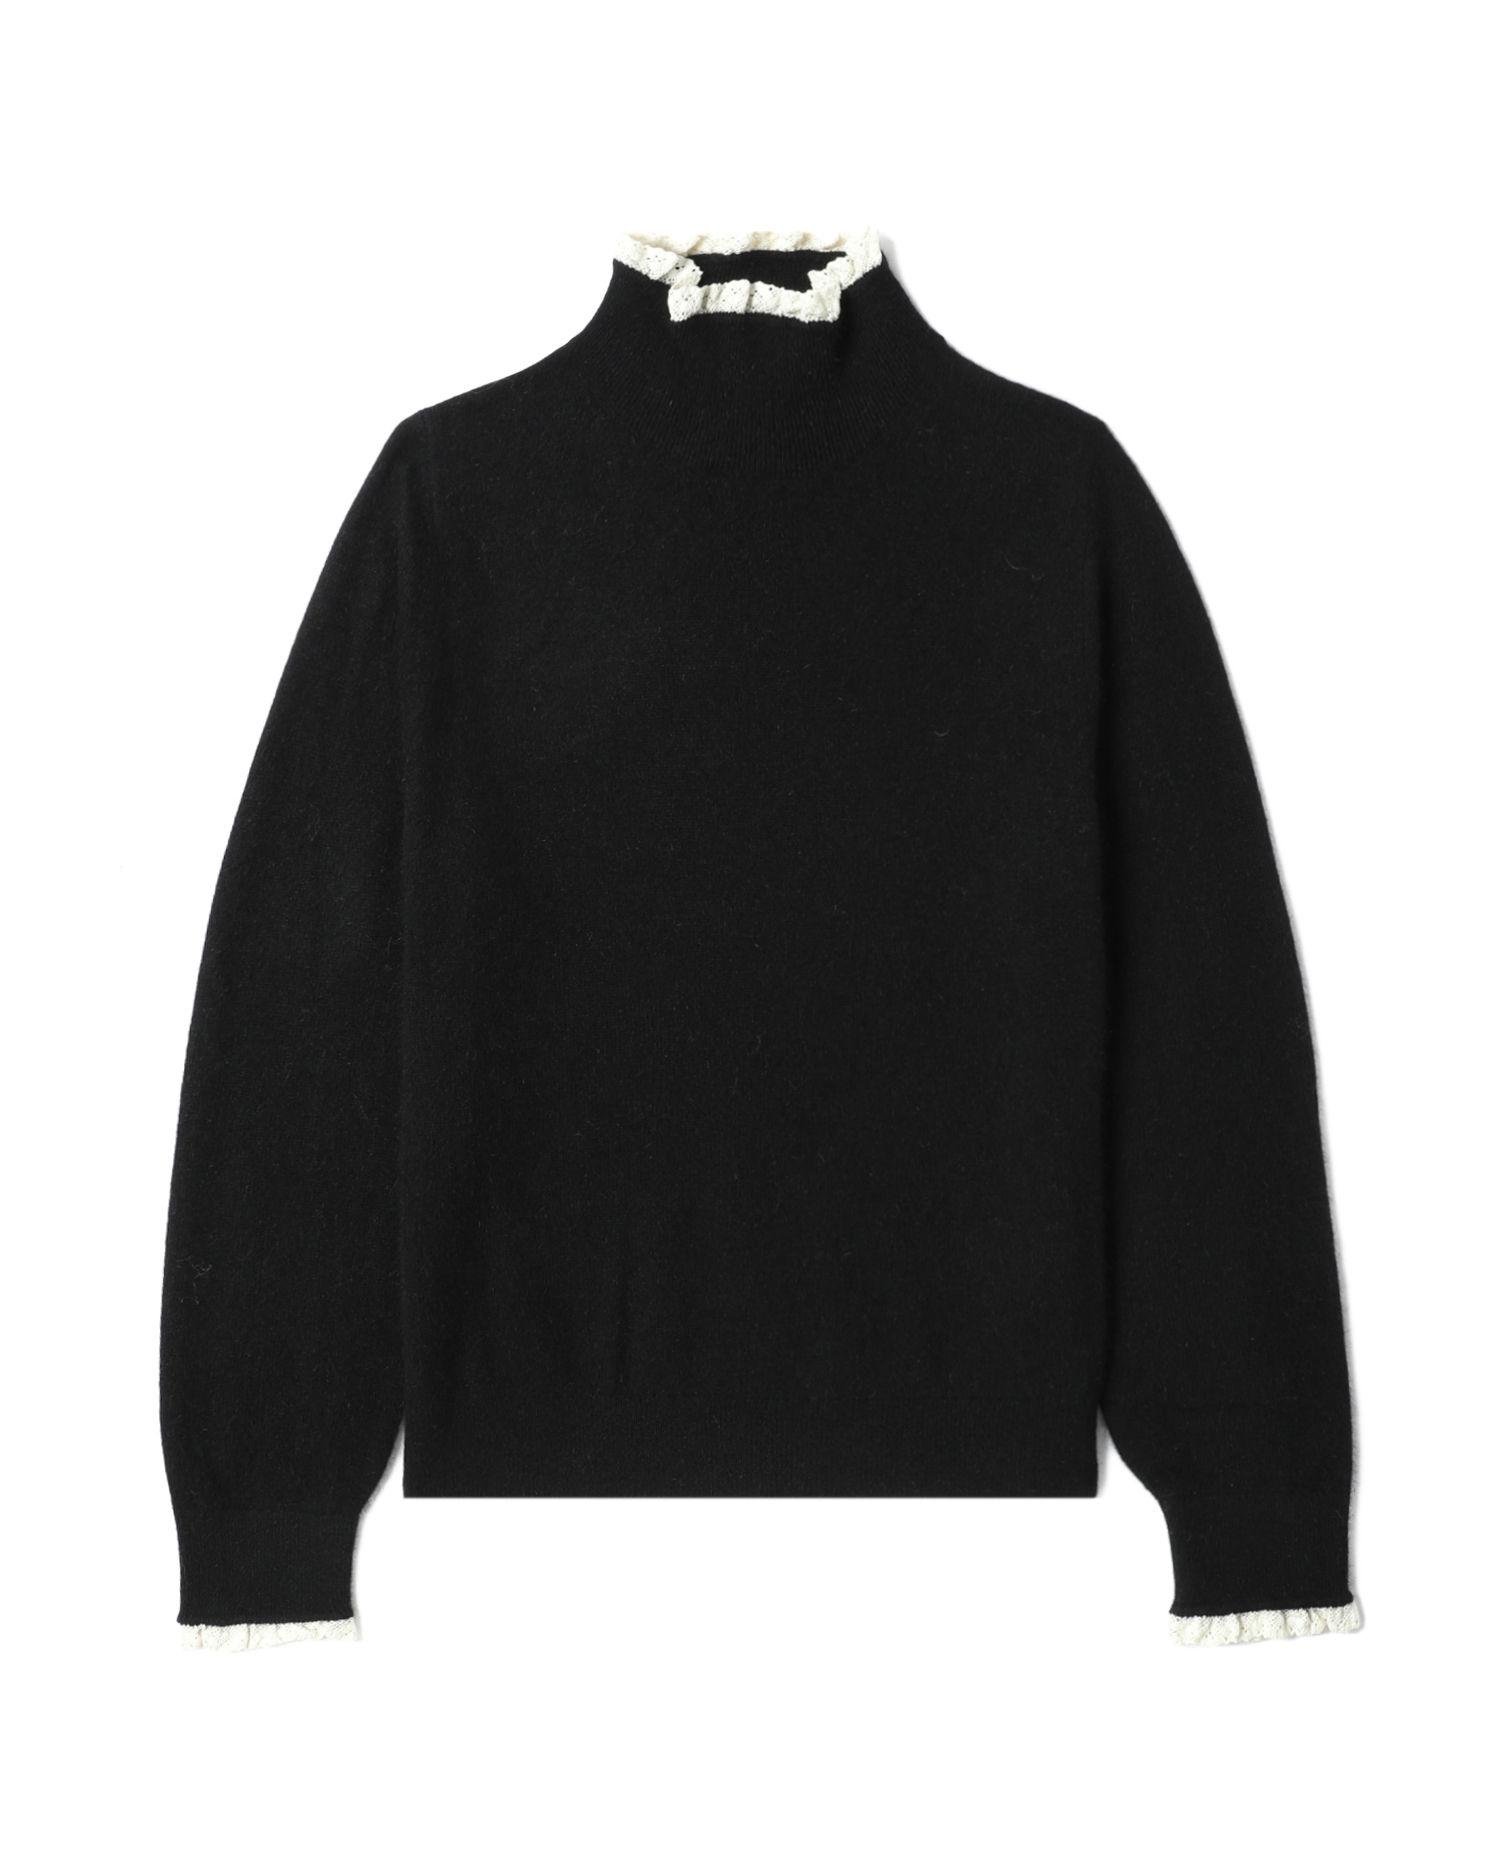 Relaxed mock neck sweater by B+AB